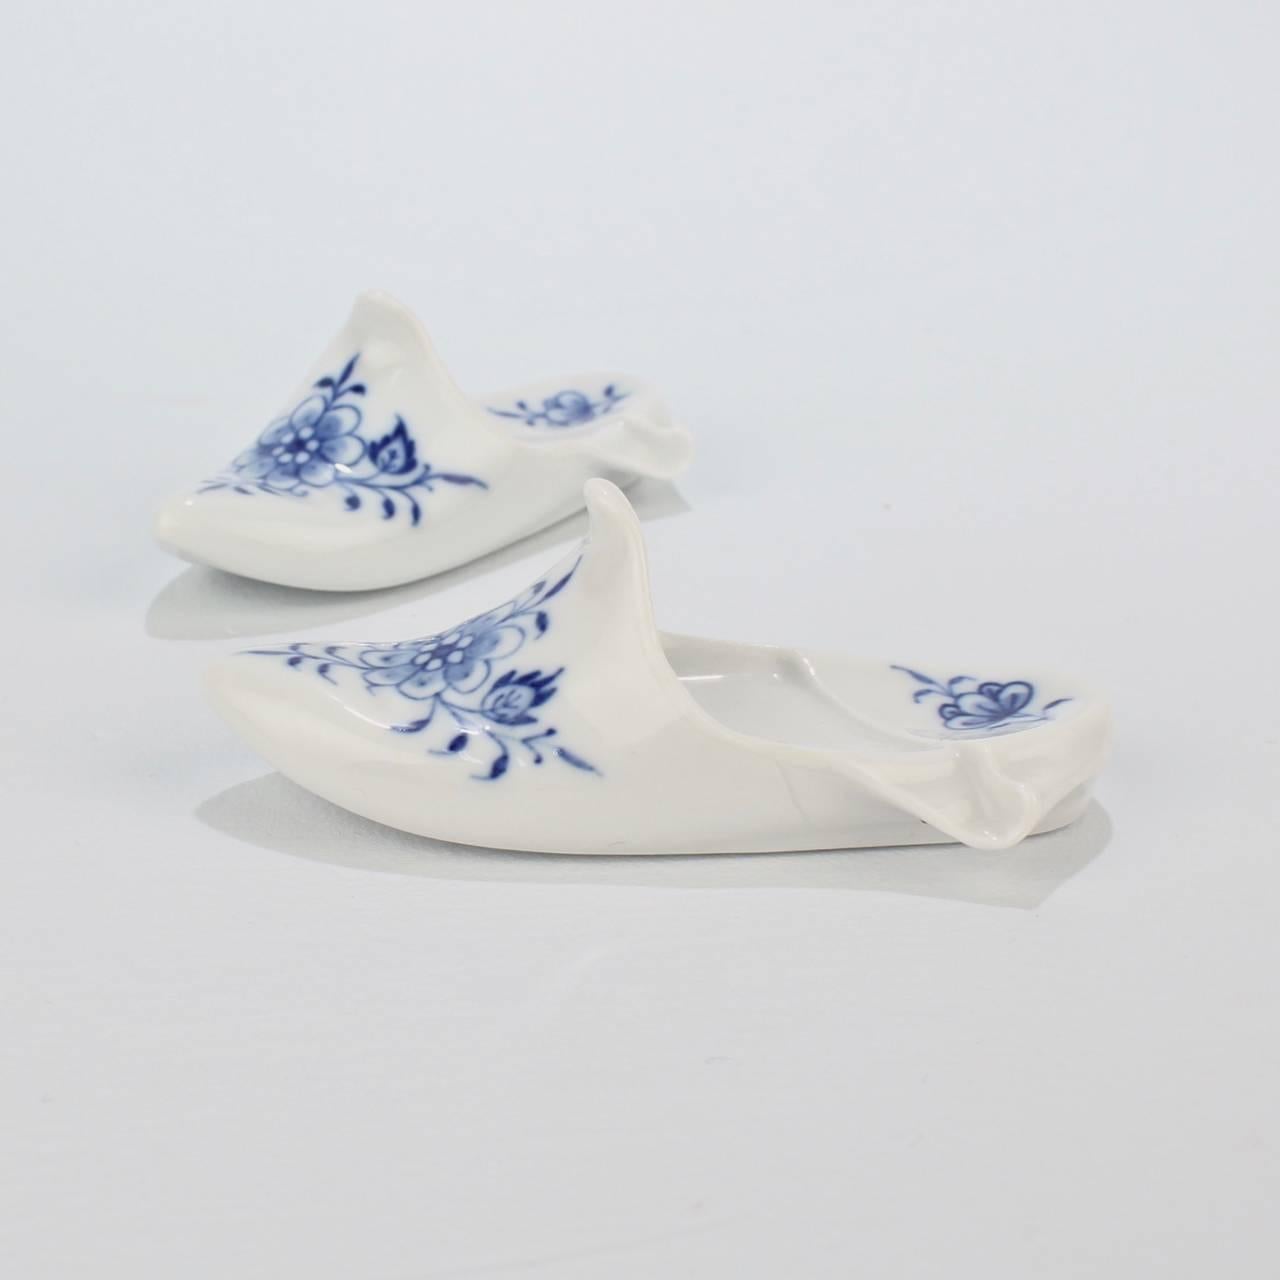 A group of two small, vintage Meissen blue onion (or Zwiebelmuster) pattern figural paperweights.

These paperweights are an iconic Meissen form in the shape of a traditional slipper (Pantoffel) or shoe.

The base bears a blue underglaze crossed